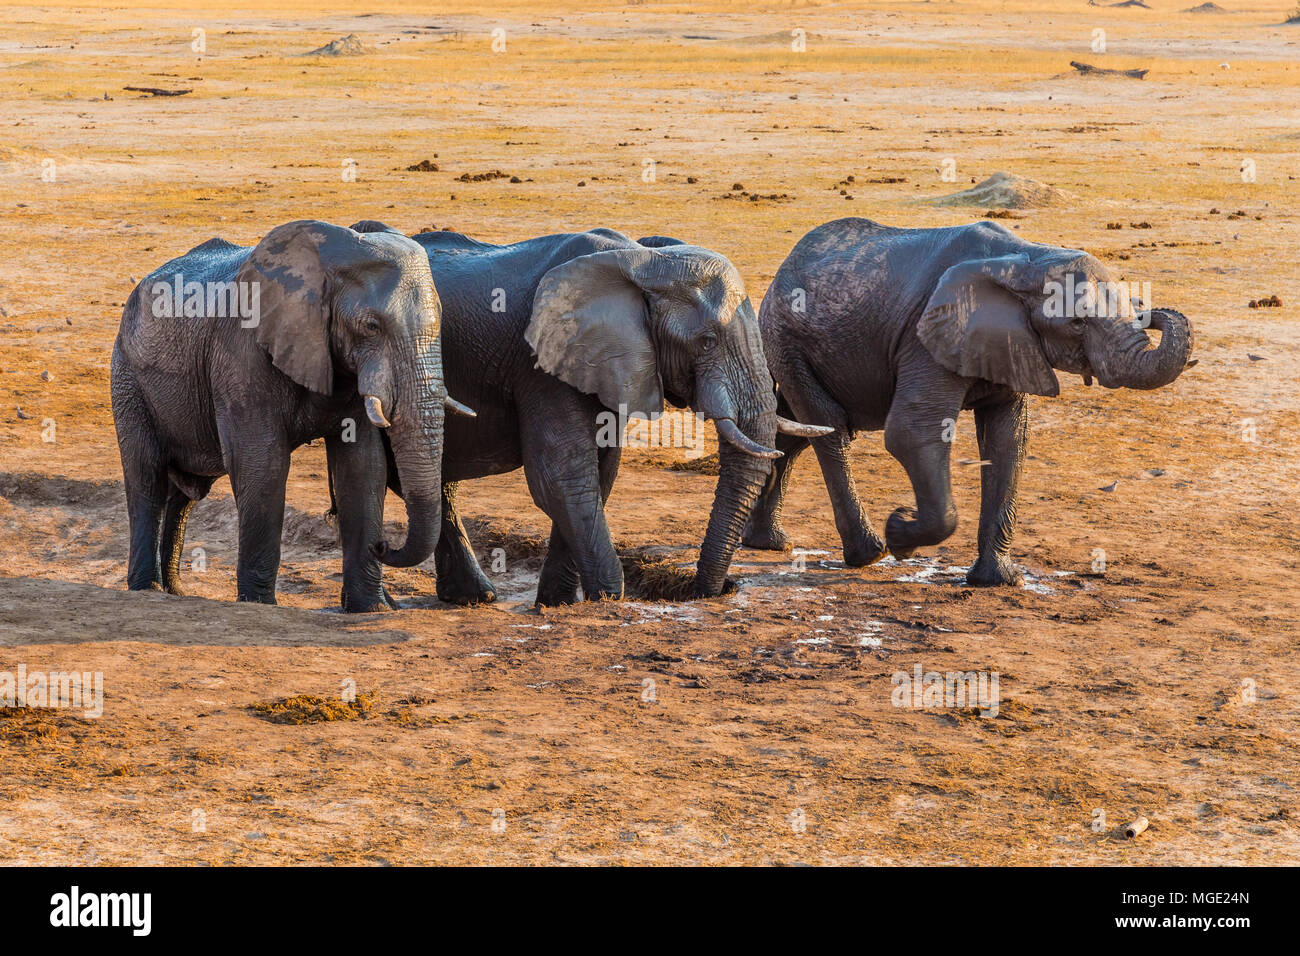 Elephants drinking the last of the water in a dried out waterhole, before the rains in Hwange Natinal Park, Zimbabwe. september 9, 2016. Stock Photo